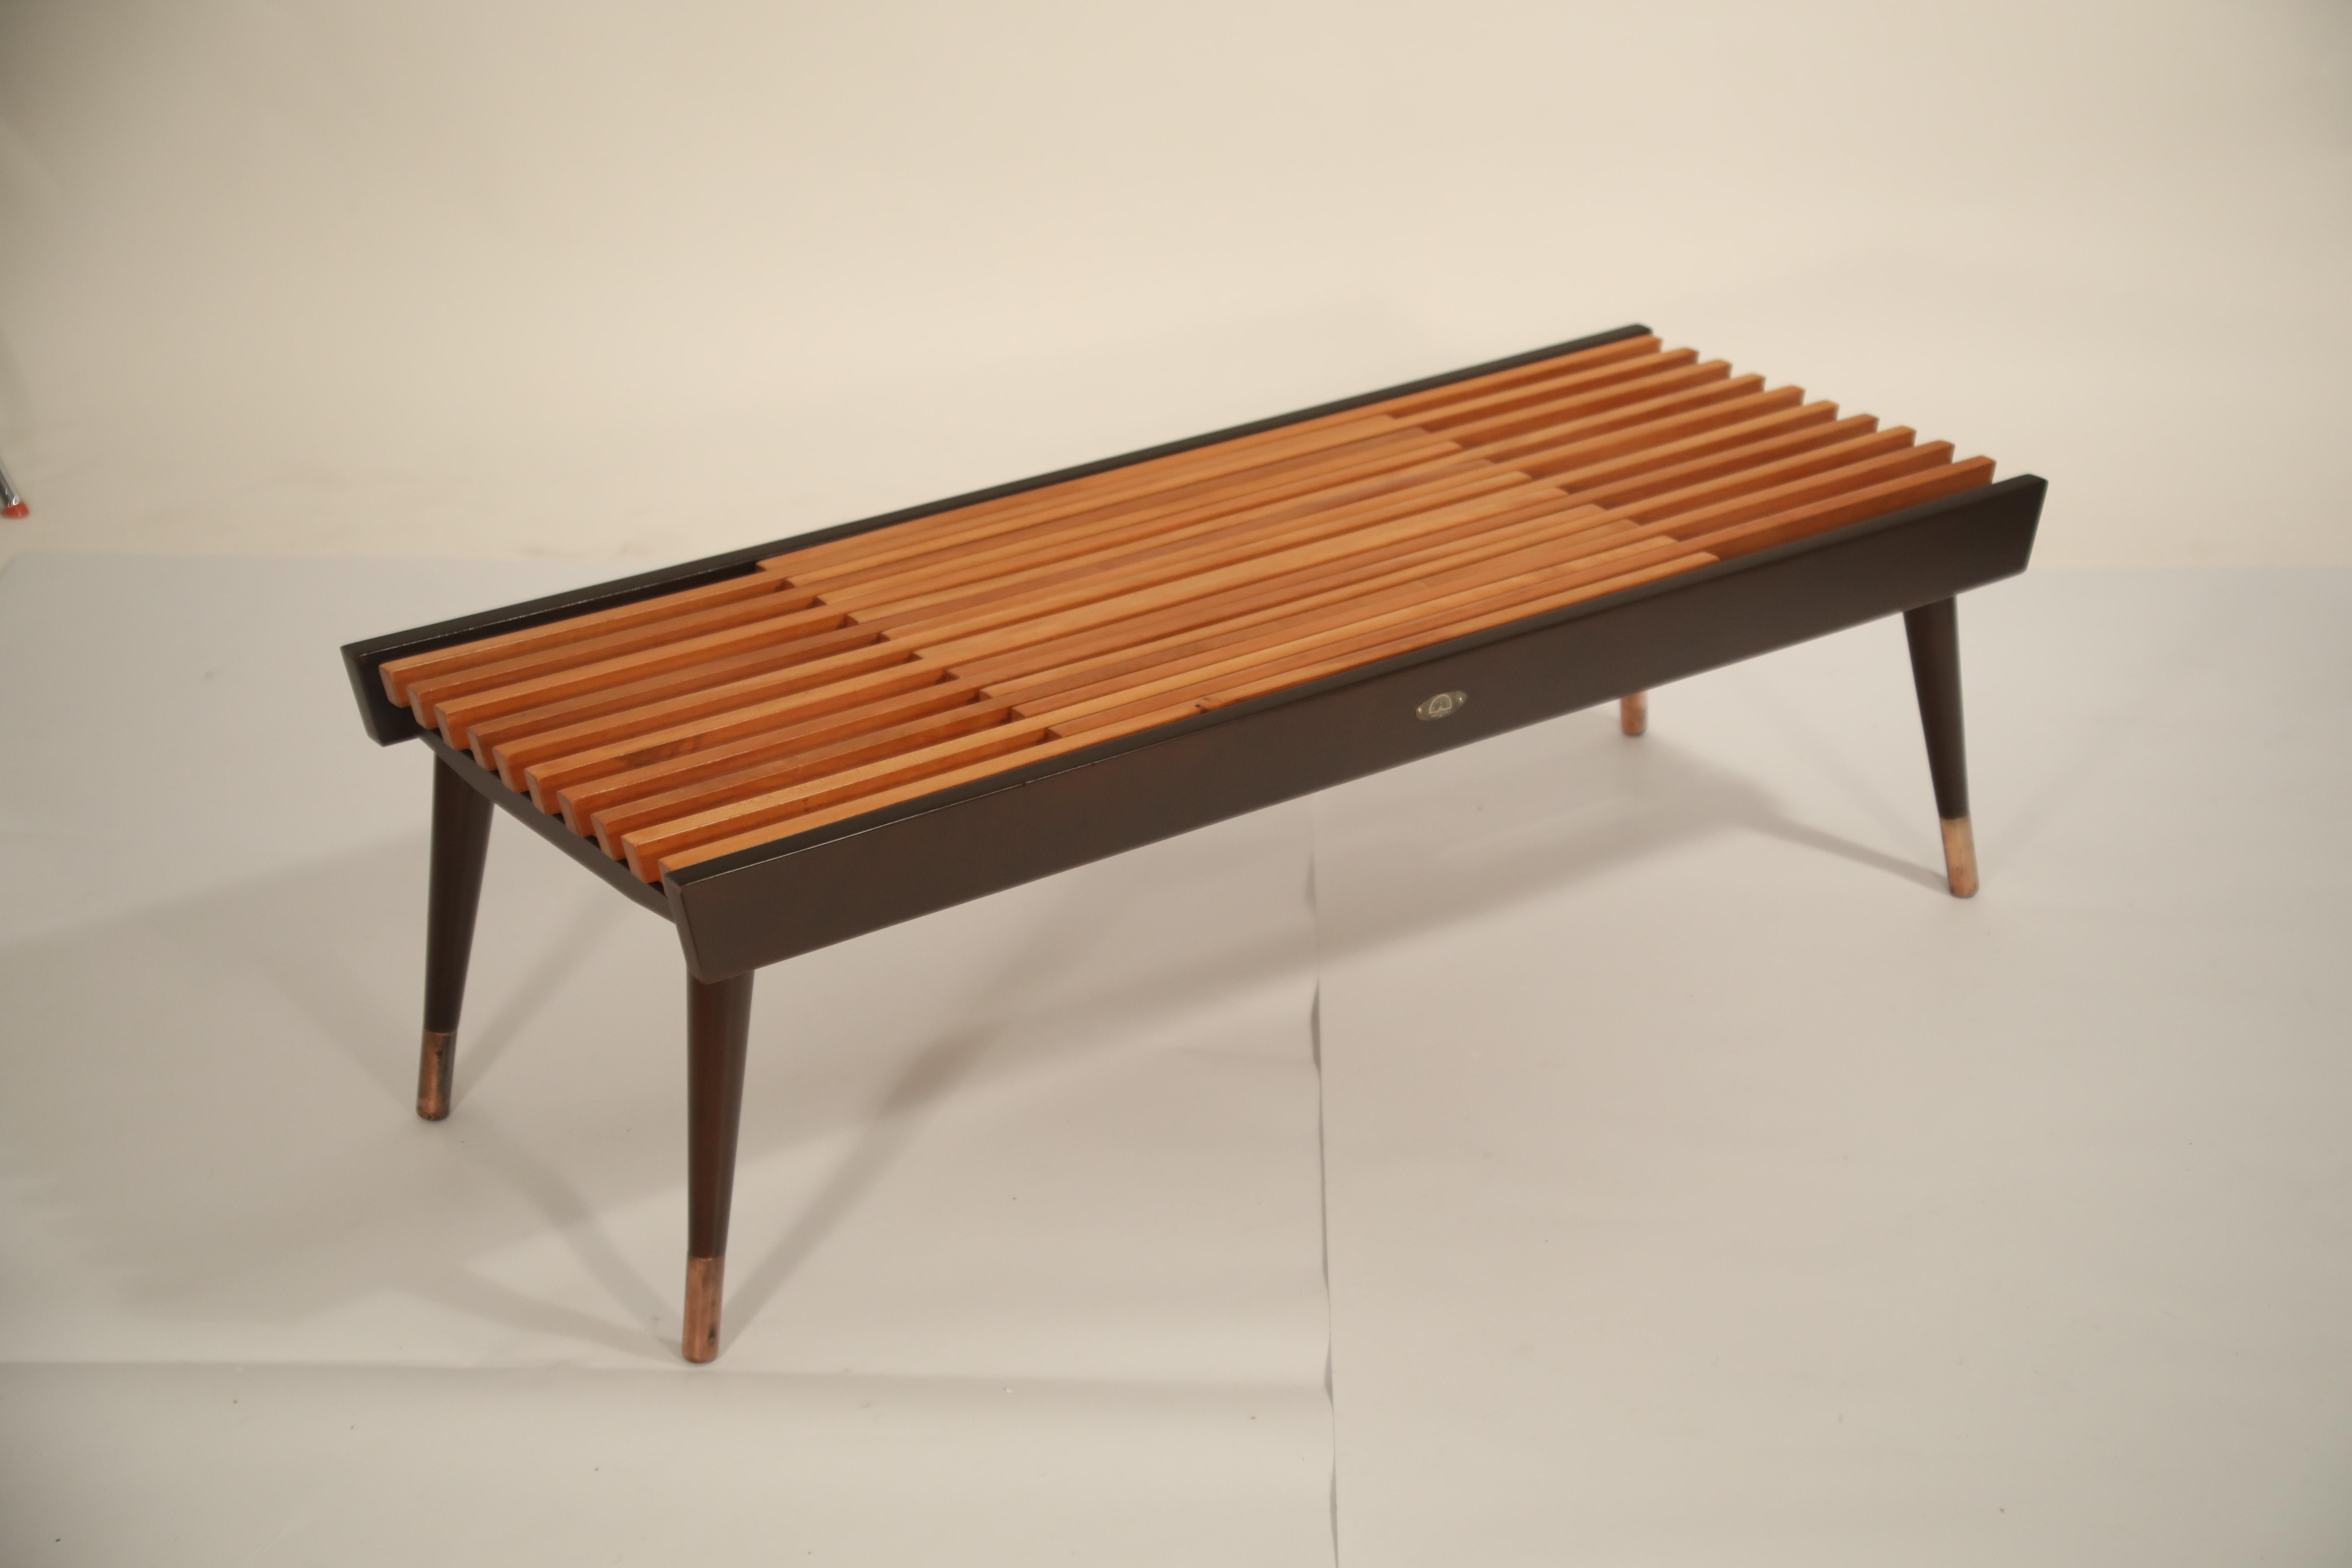 Extendable Slatted Wood Bench or Coffee Table by Maruni, 1950s Hiroshima Japan 1